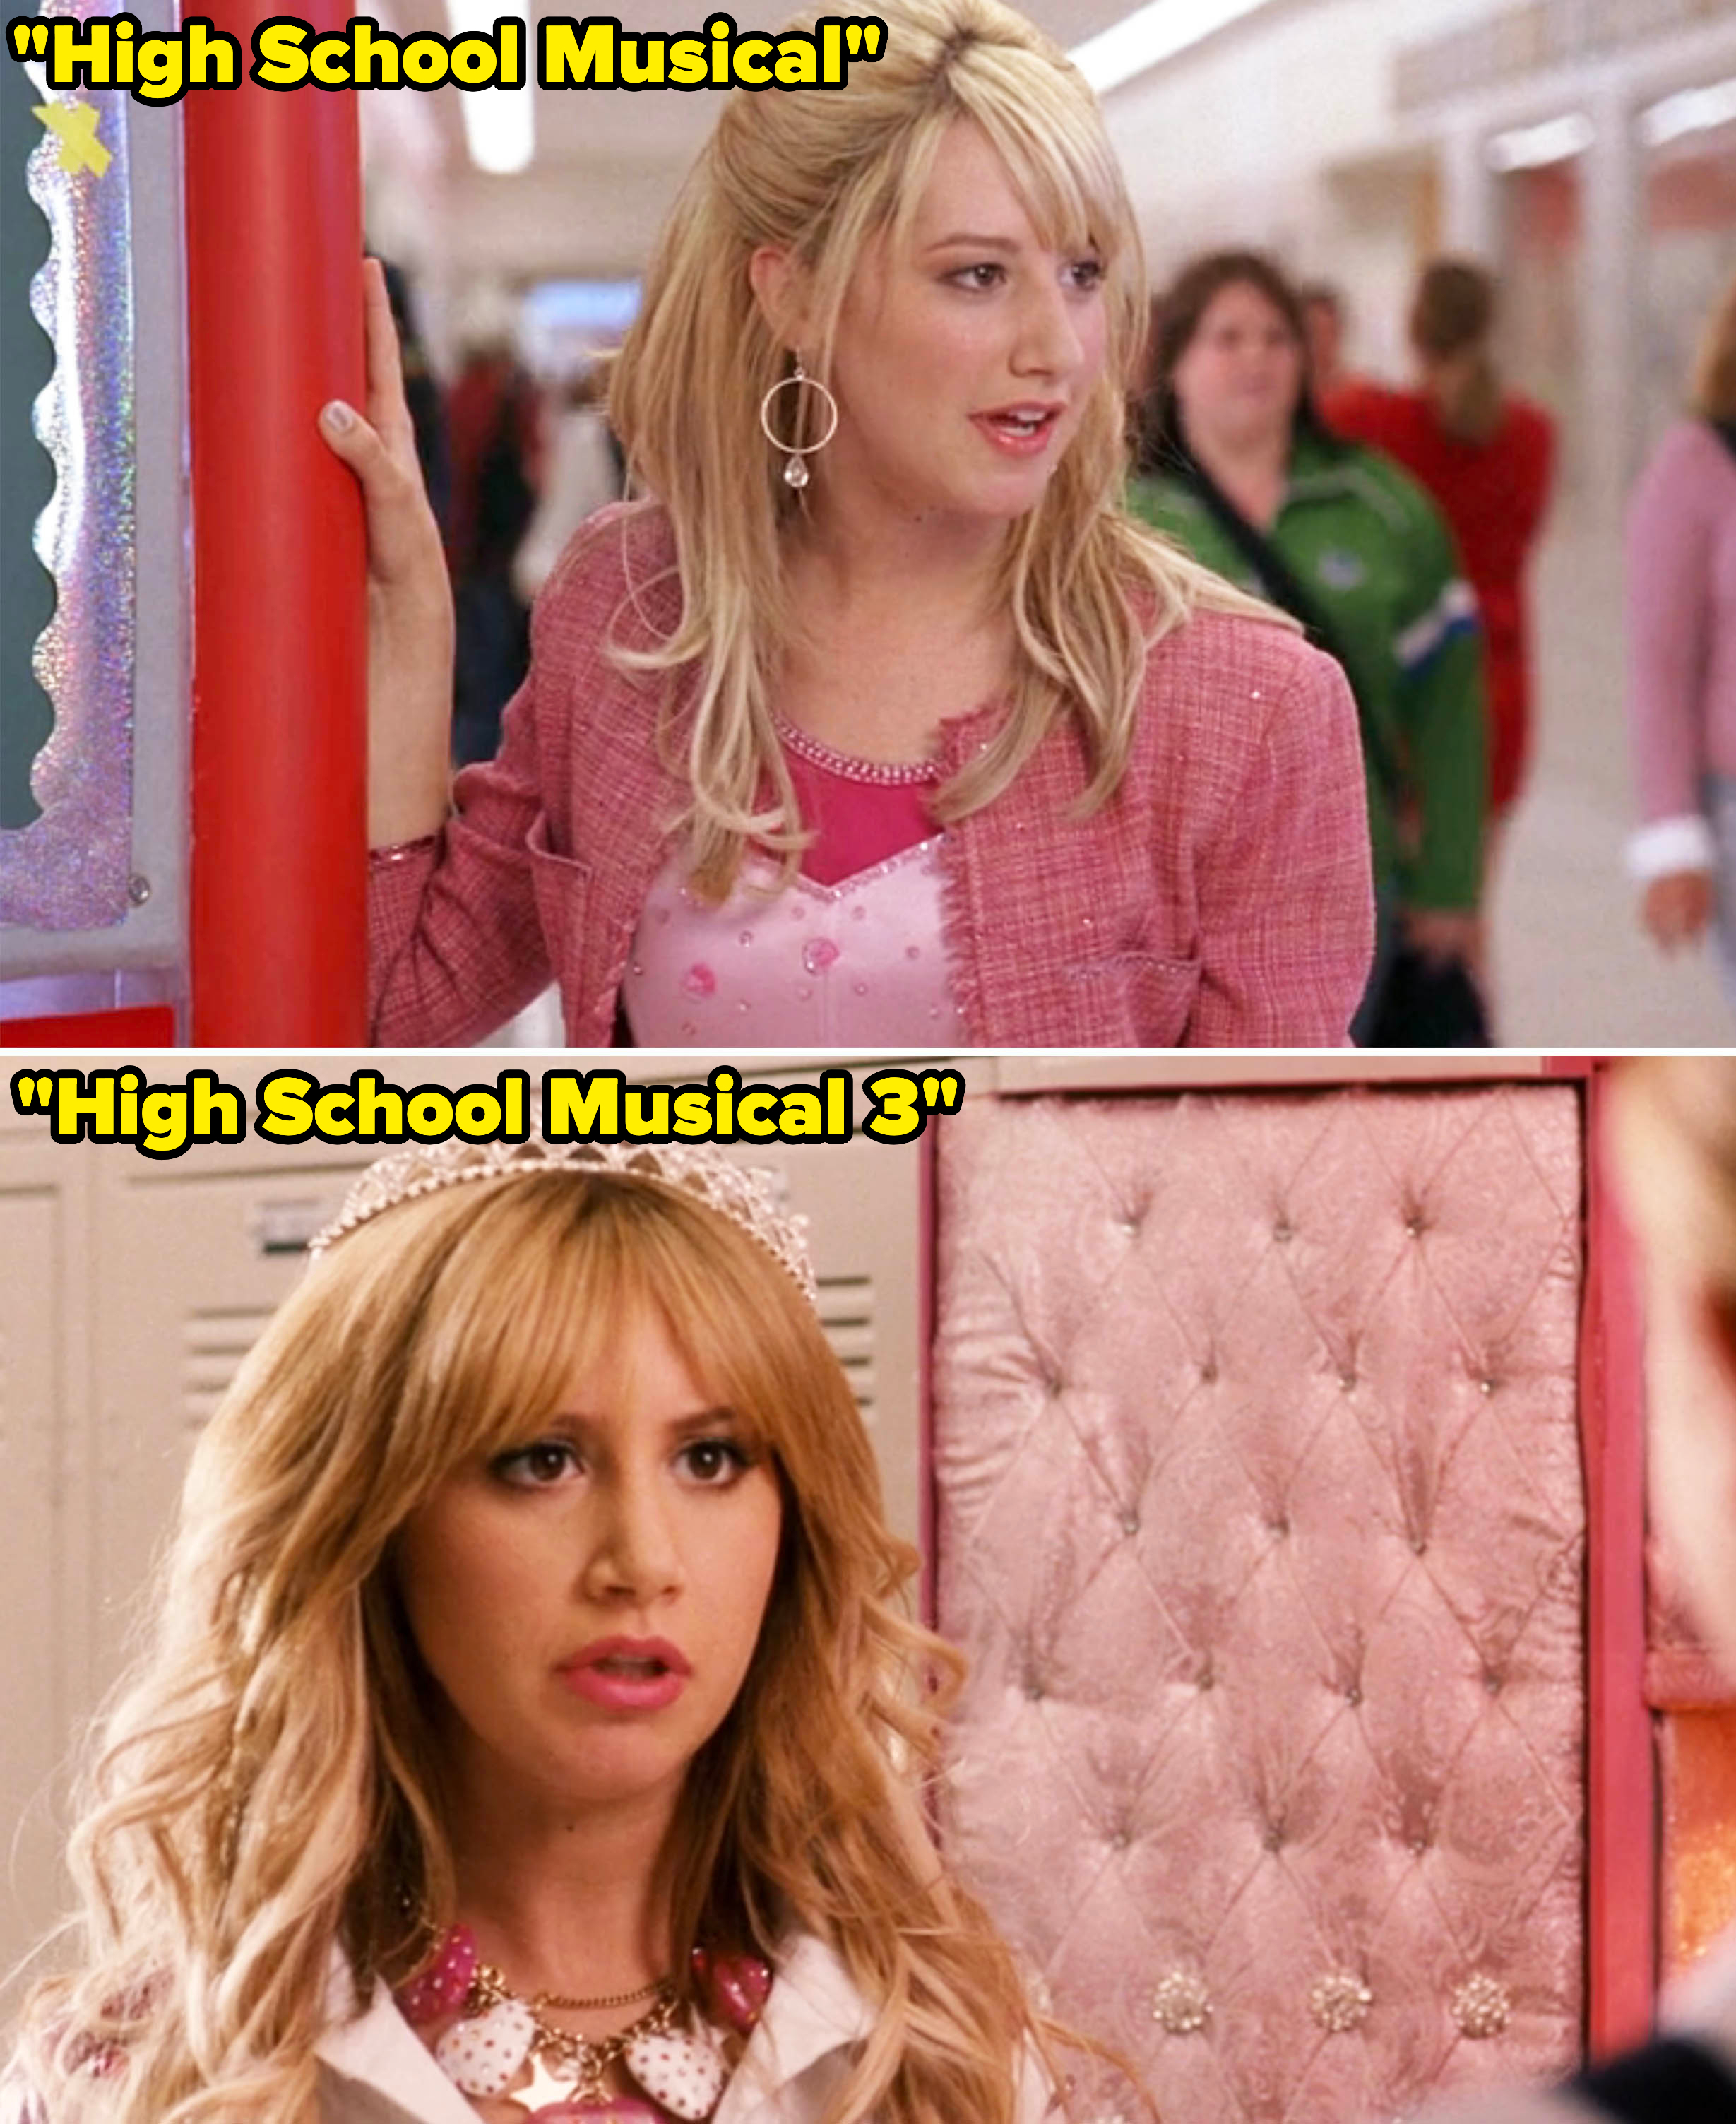 Screenshots from the &quot;High School Musical&quot; films